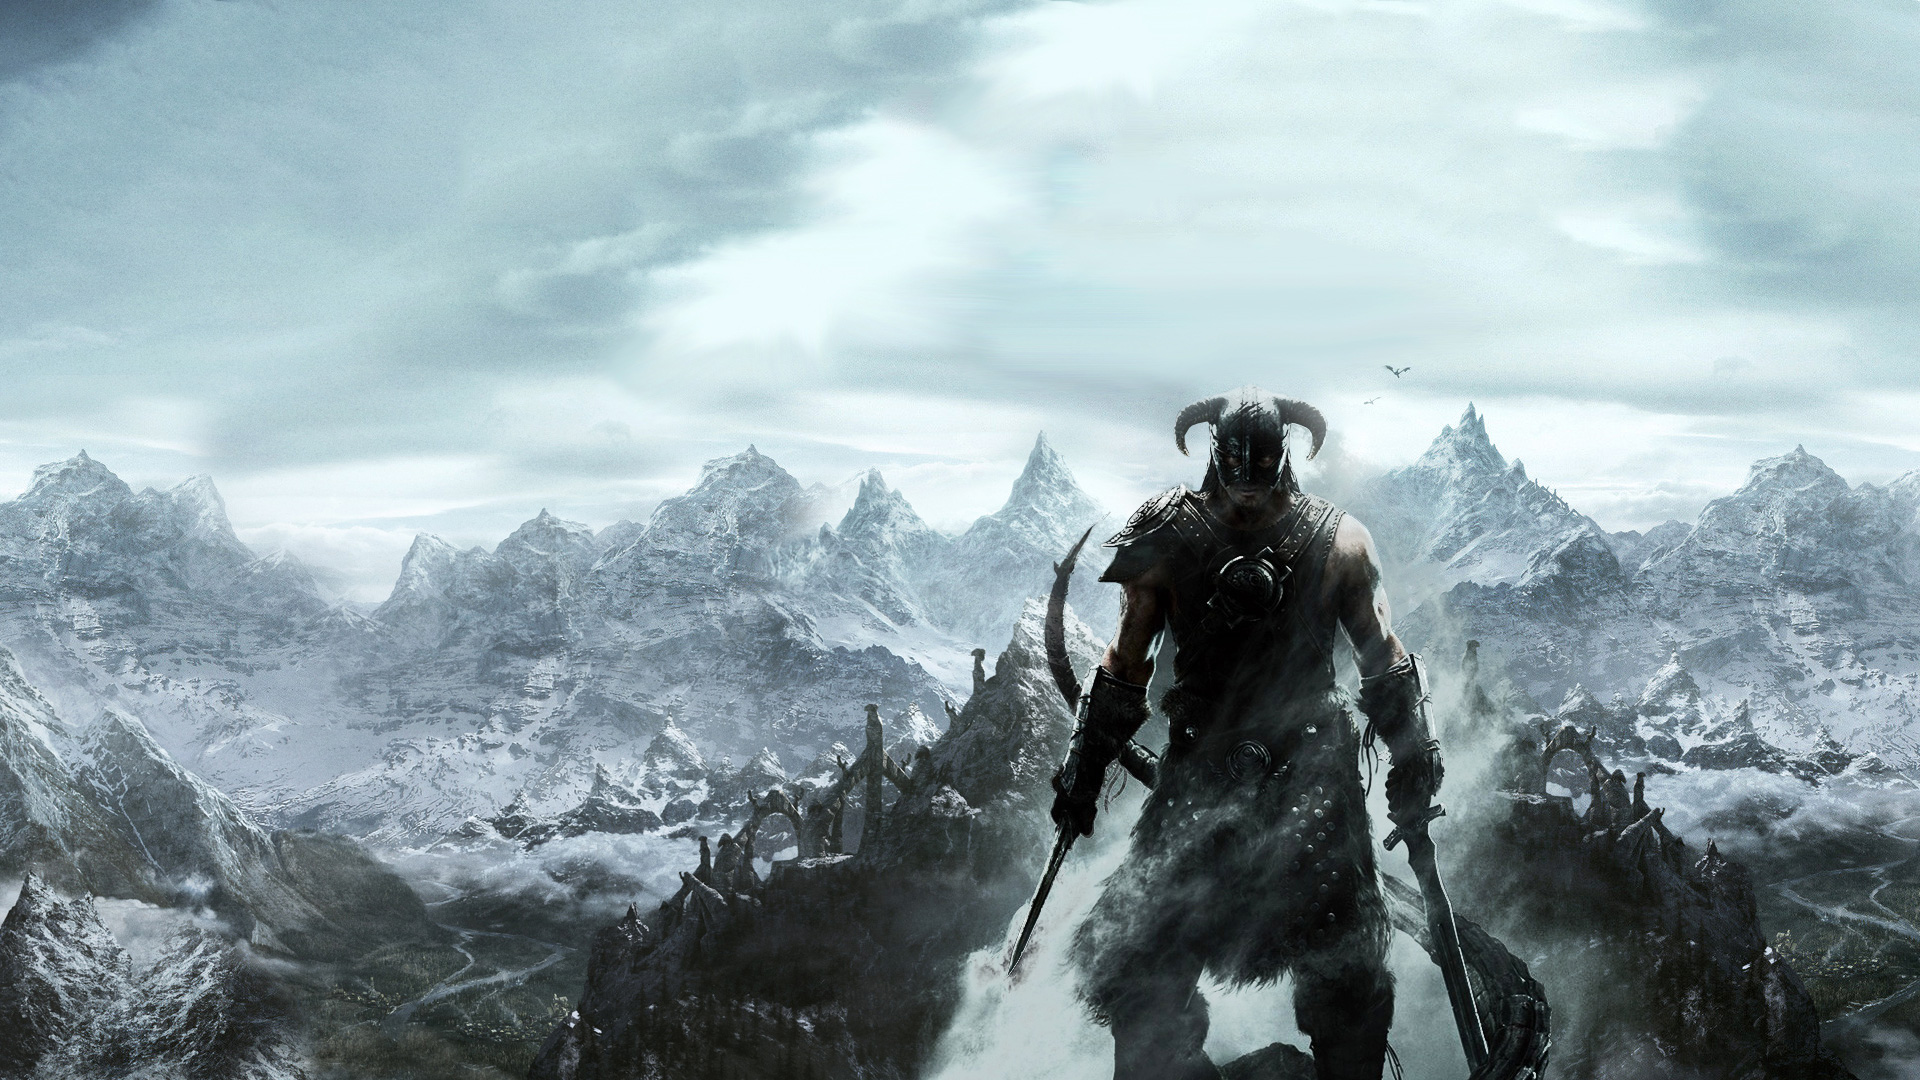 Download Wallpaper - Dual Monitor Backgrounds Skyrim , HD Wallpaper & Backgrounds